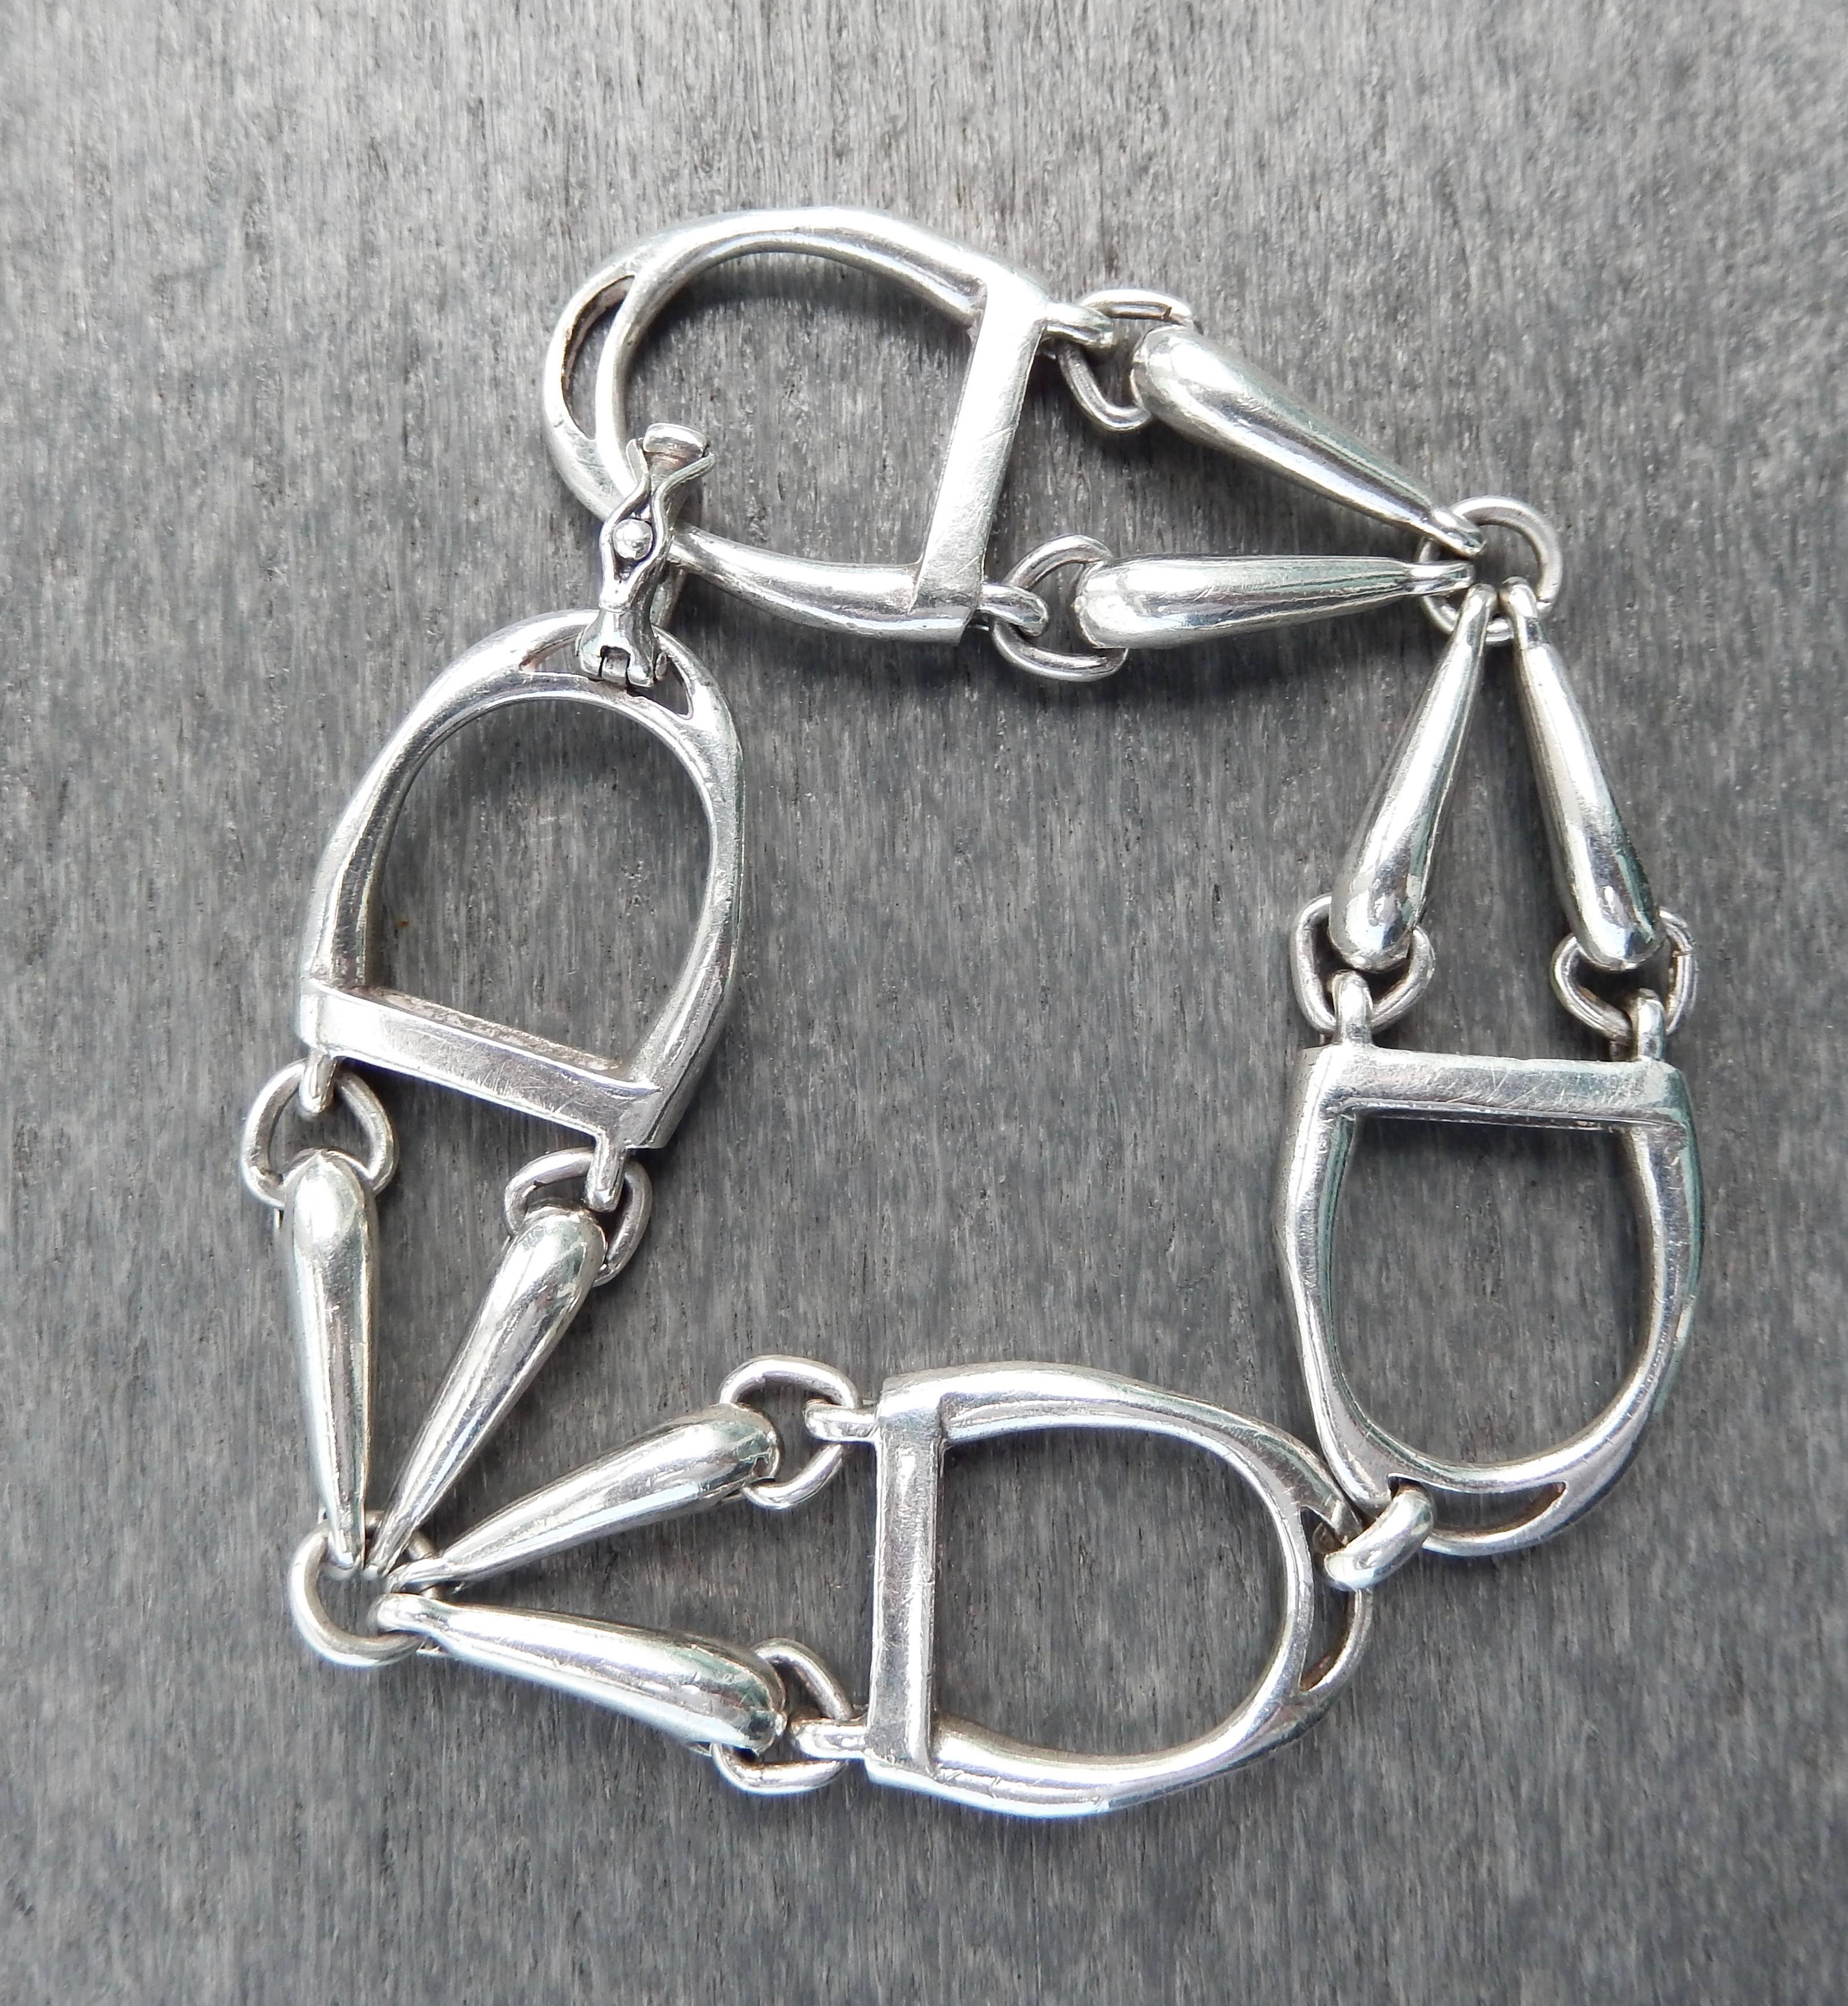 A sterling silver link bracelet with the classic Gucci equestrian "horse bit" design. A beautiful example of 70s clean, modernist design.  Marked: GUCCI  ITALY 925